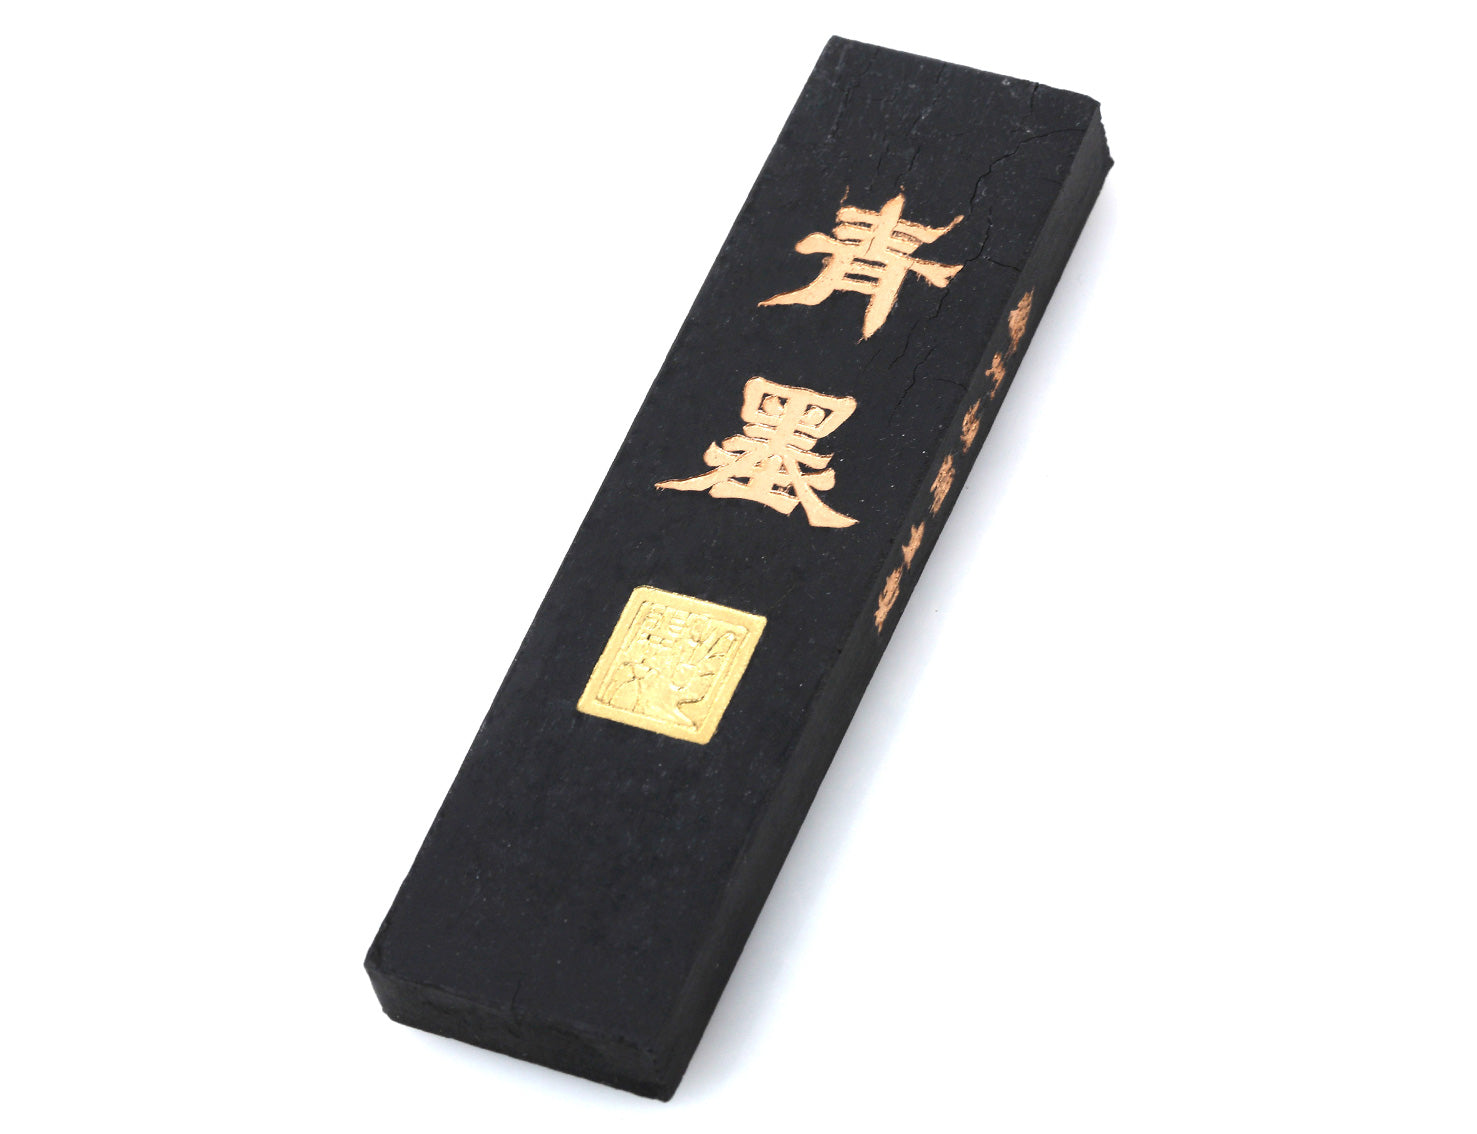 Traditional Chinese / Japanese ink stick for sumi painting and calligraphy writing with golden characters decorating its body; producing ink in a shade of dark-blueish green